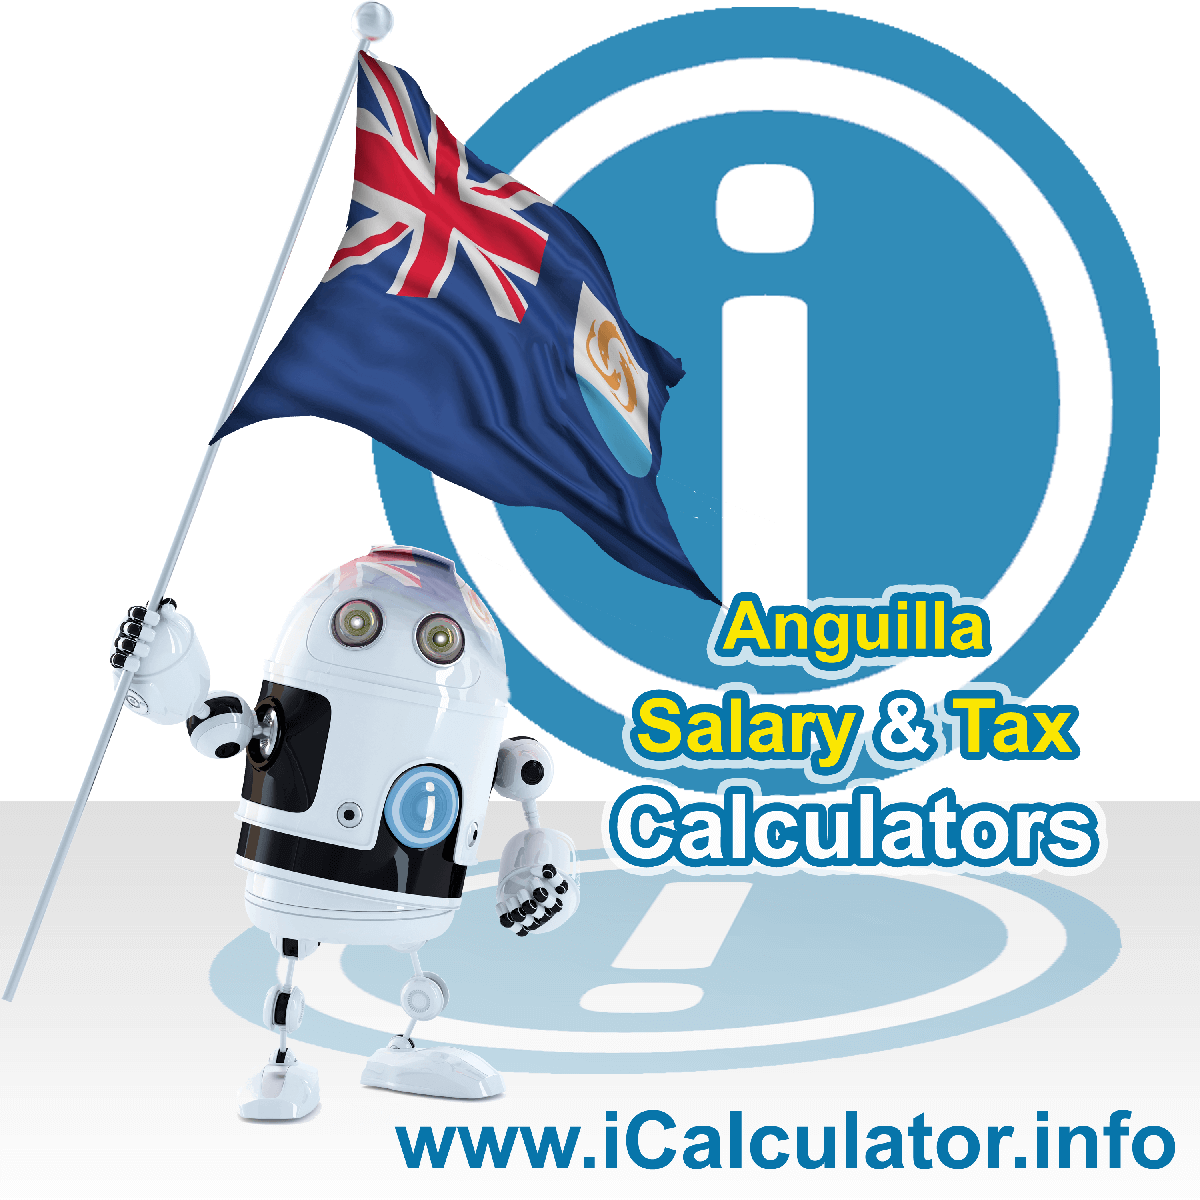 Anguilla Tax Calculator. This image shows the Anguilla flag and information relating to the tax formula for the Anguilla Salary Calculator